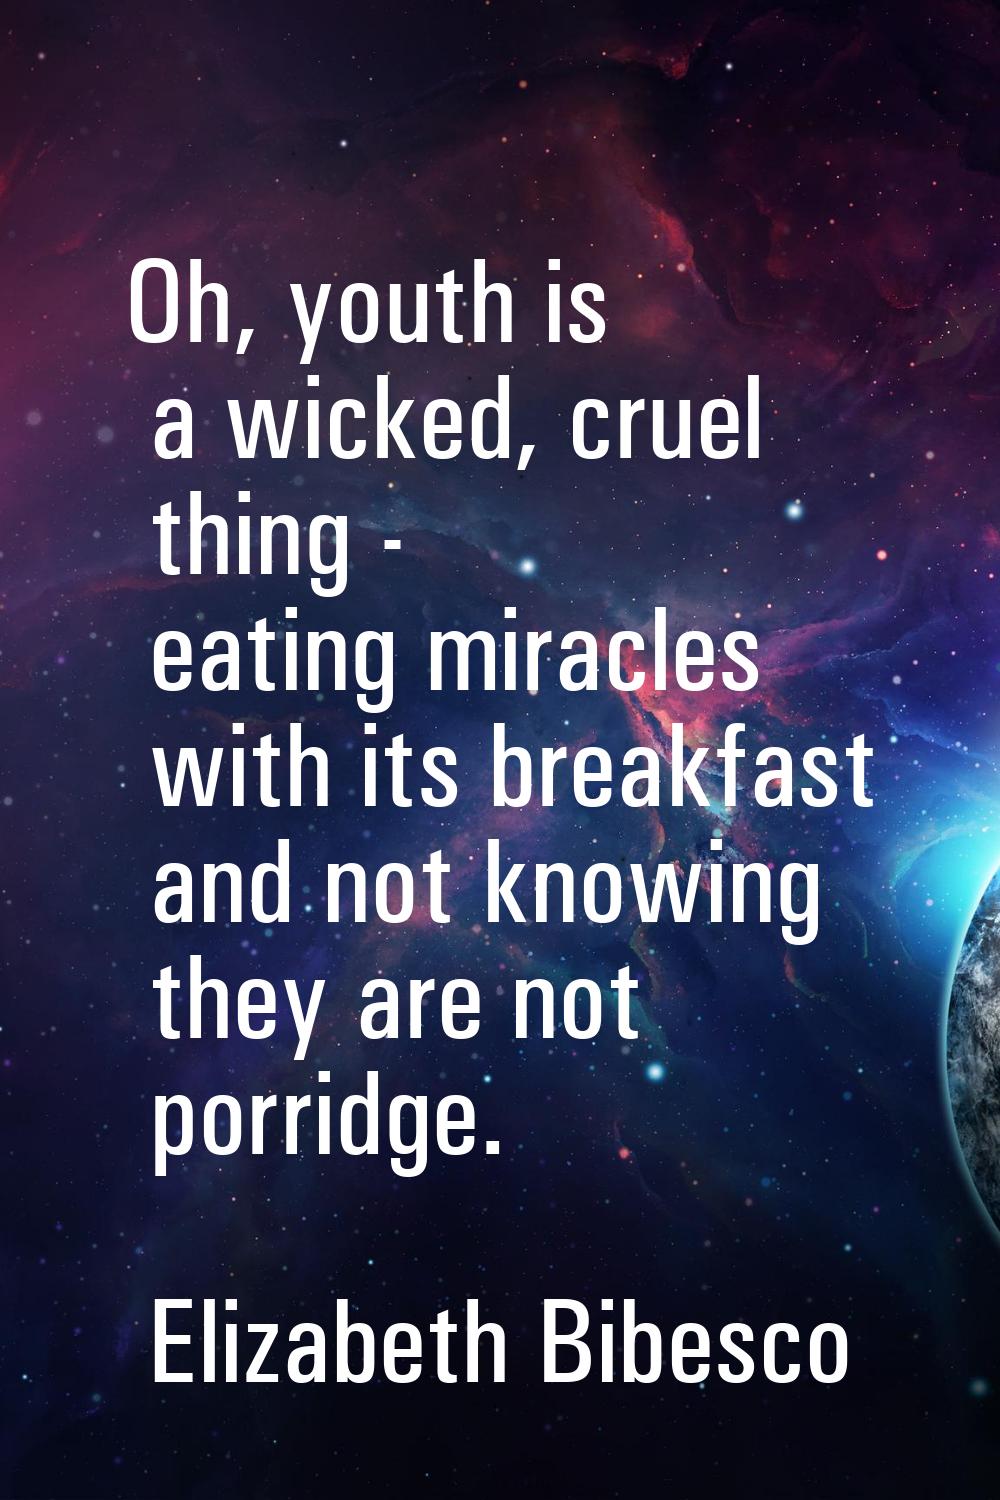 Oh, youth is a wicked, cruel thing - eating miracles with its breakfast and not knowing they are no